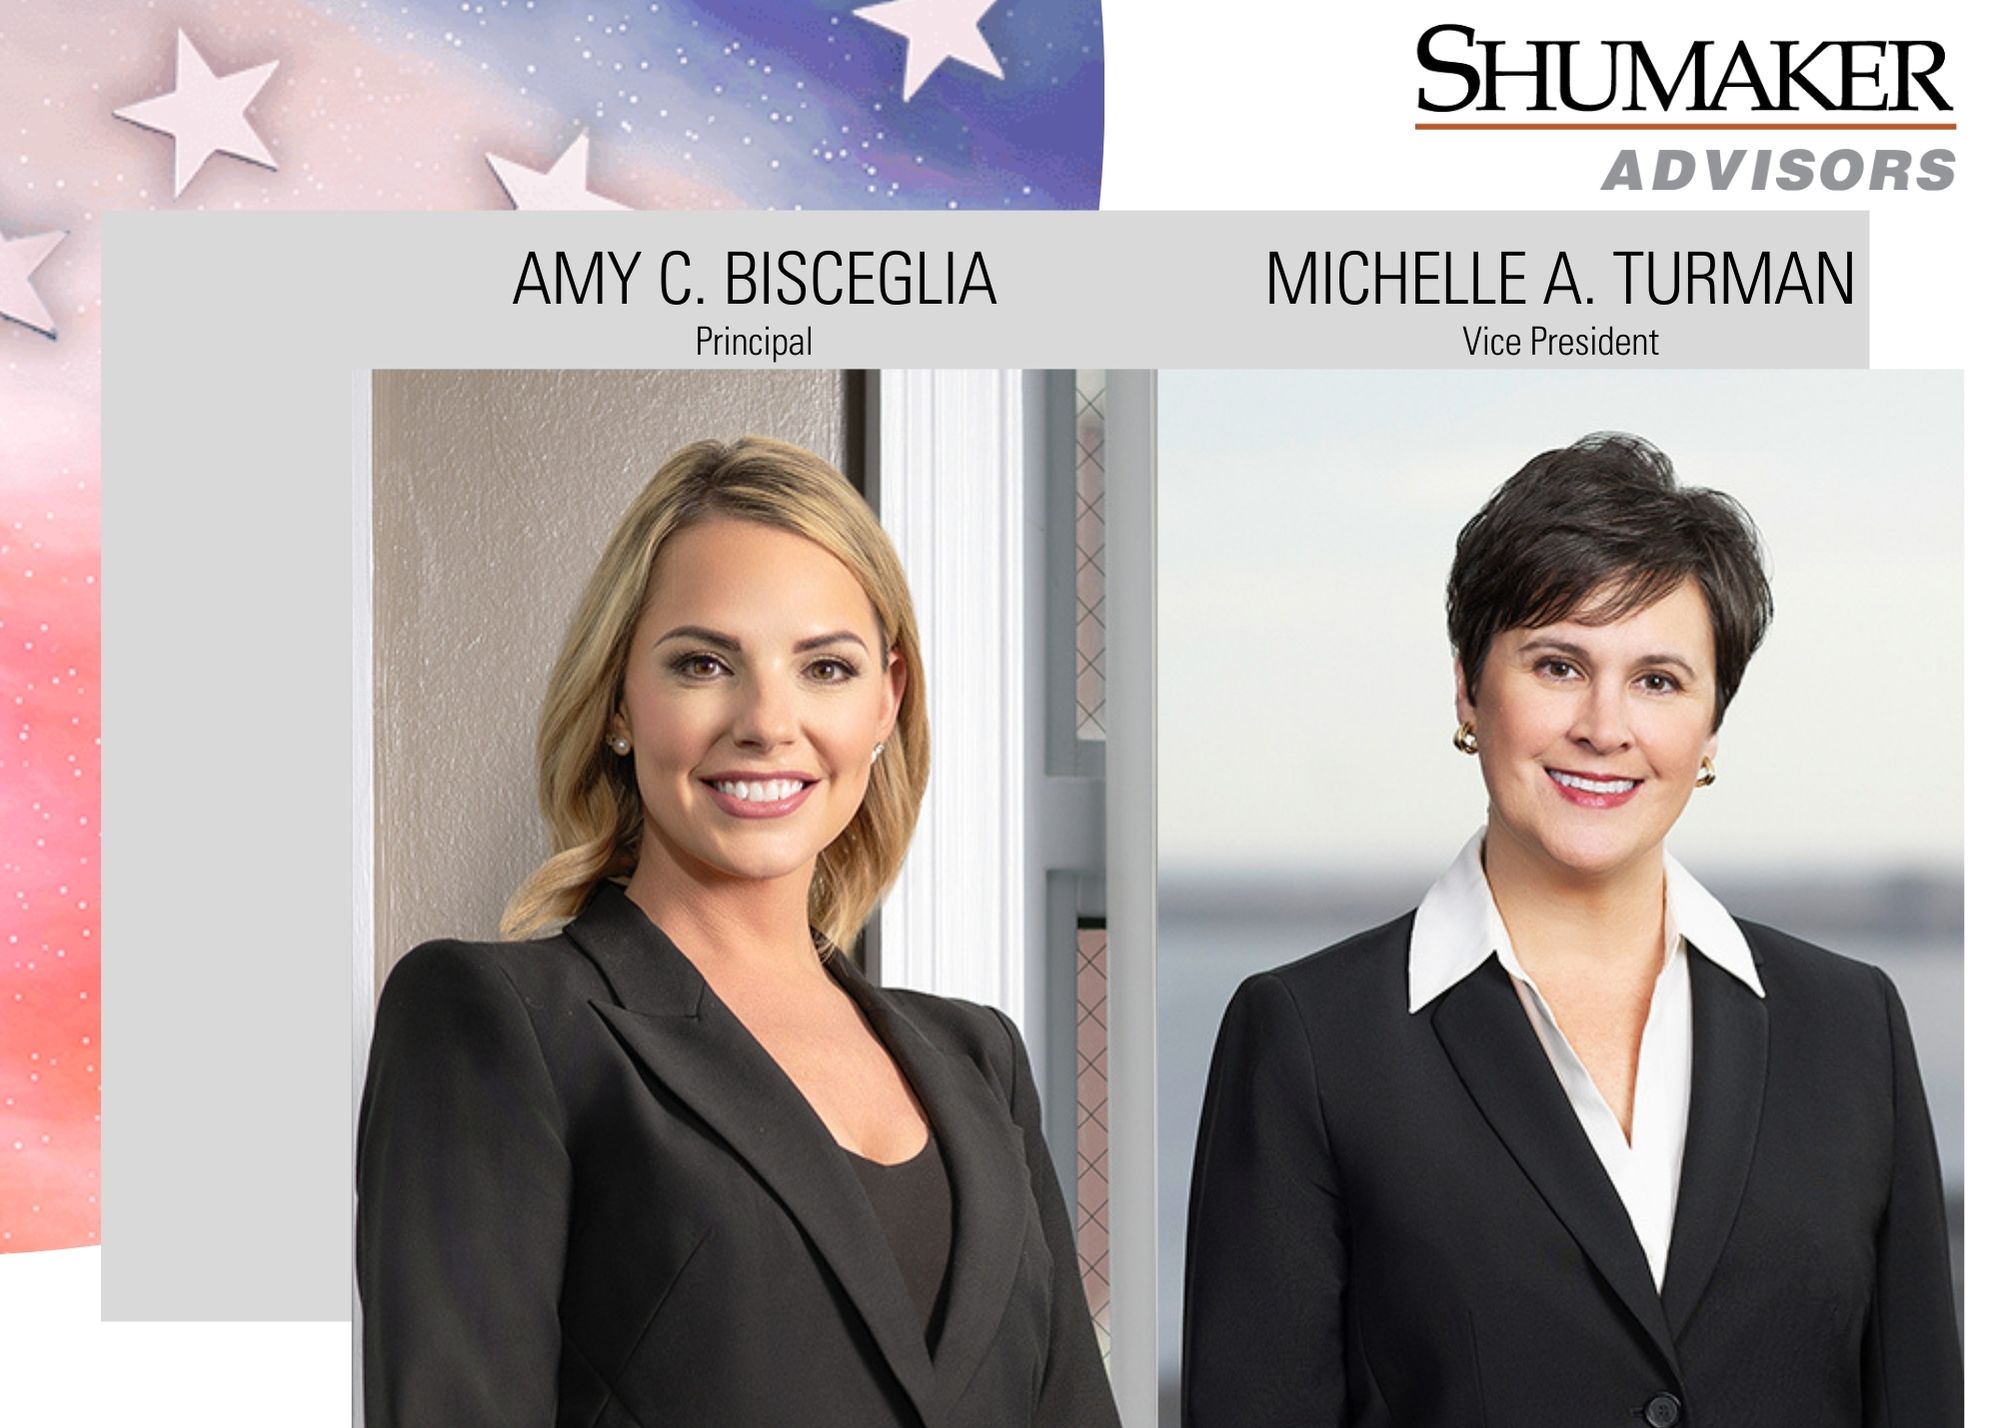 Rising Client Demand Drives Expansion: Shumaker Advisors Bolsters Team with Key Government Affairs Specialists